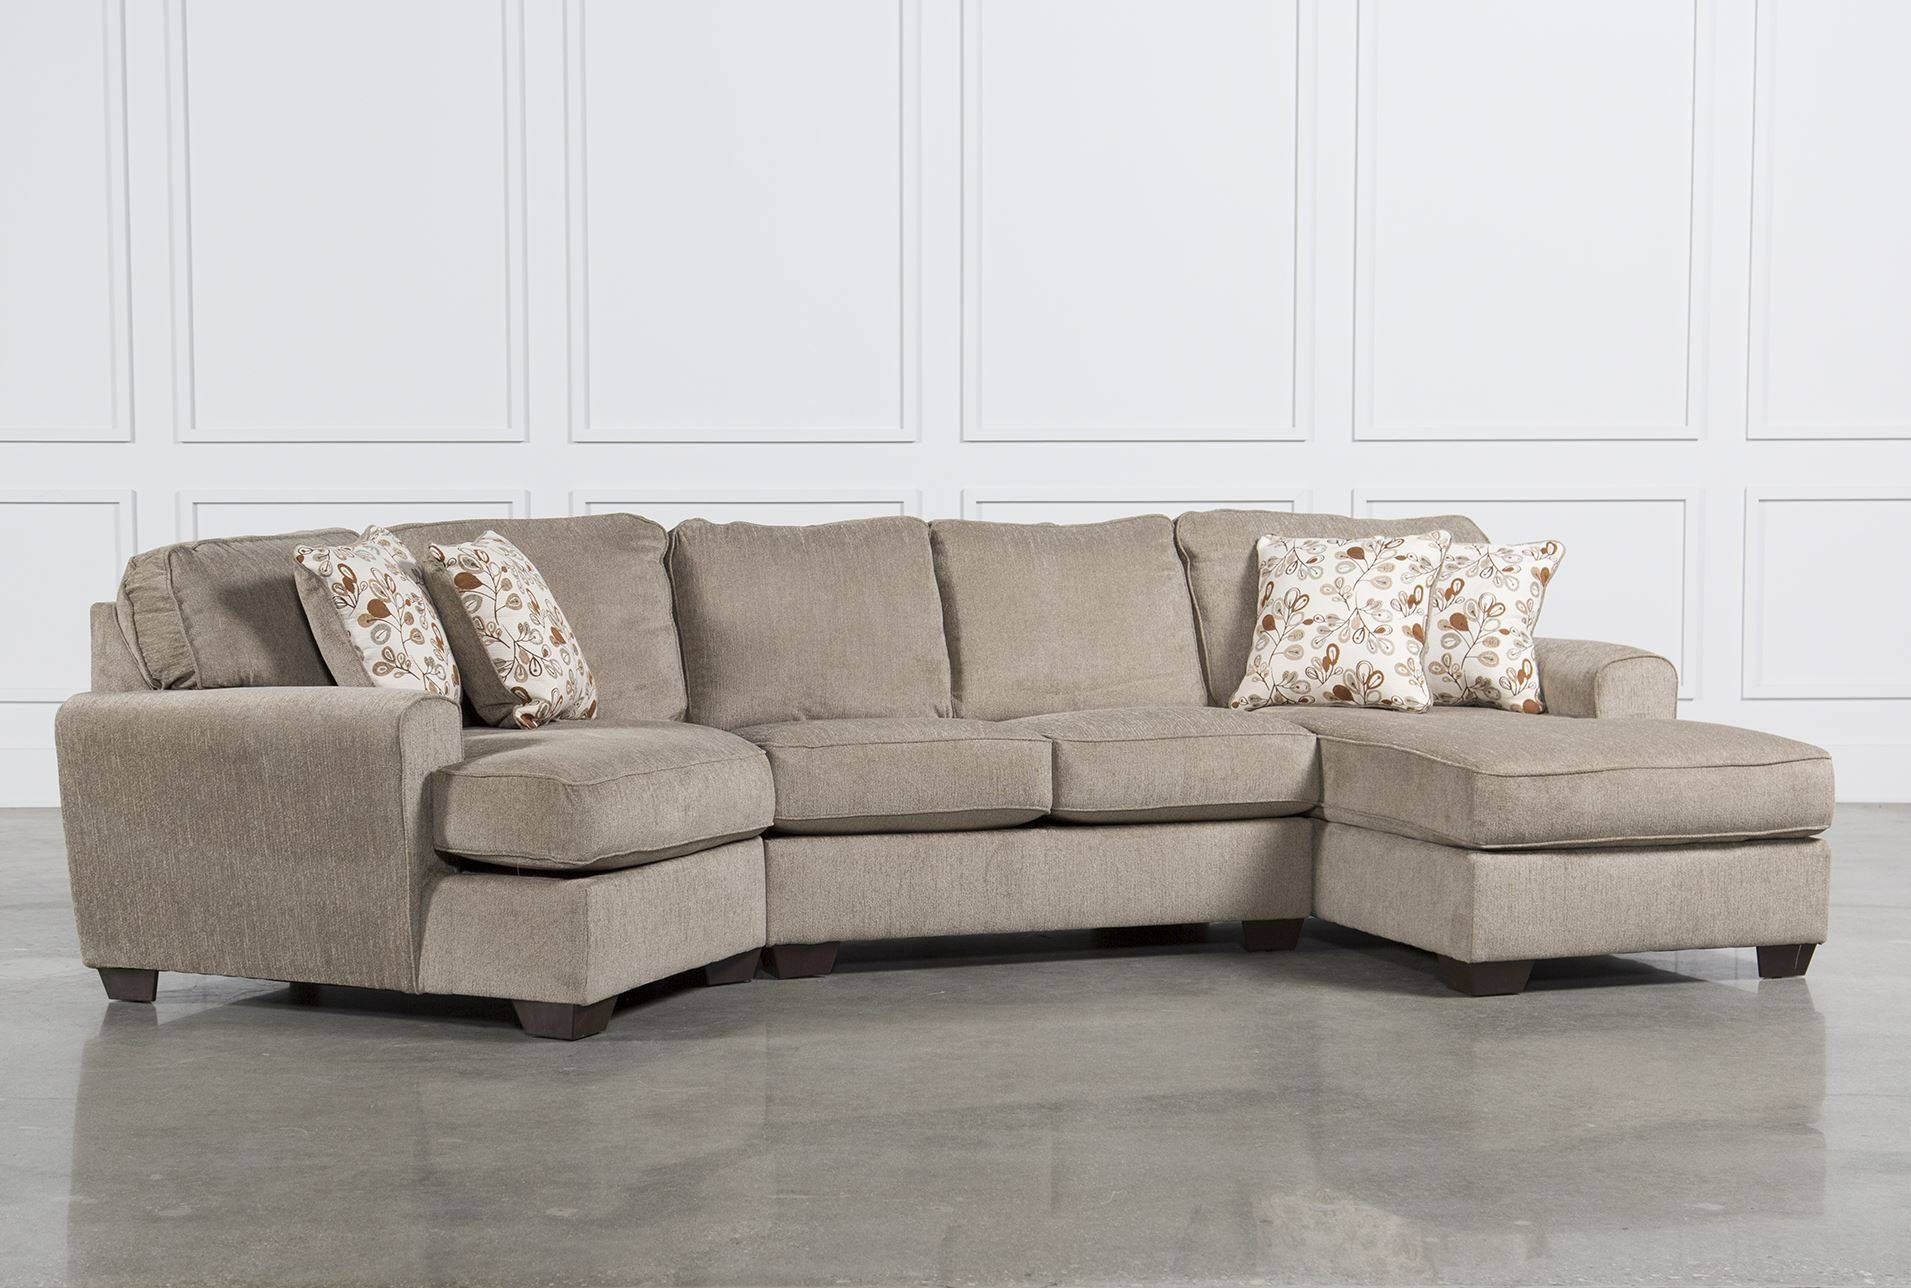 Living Room Curved Leather Couch Cuddler Sofa Half Moon Sofa Within Half Moon Sectional Sofas 